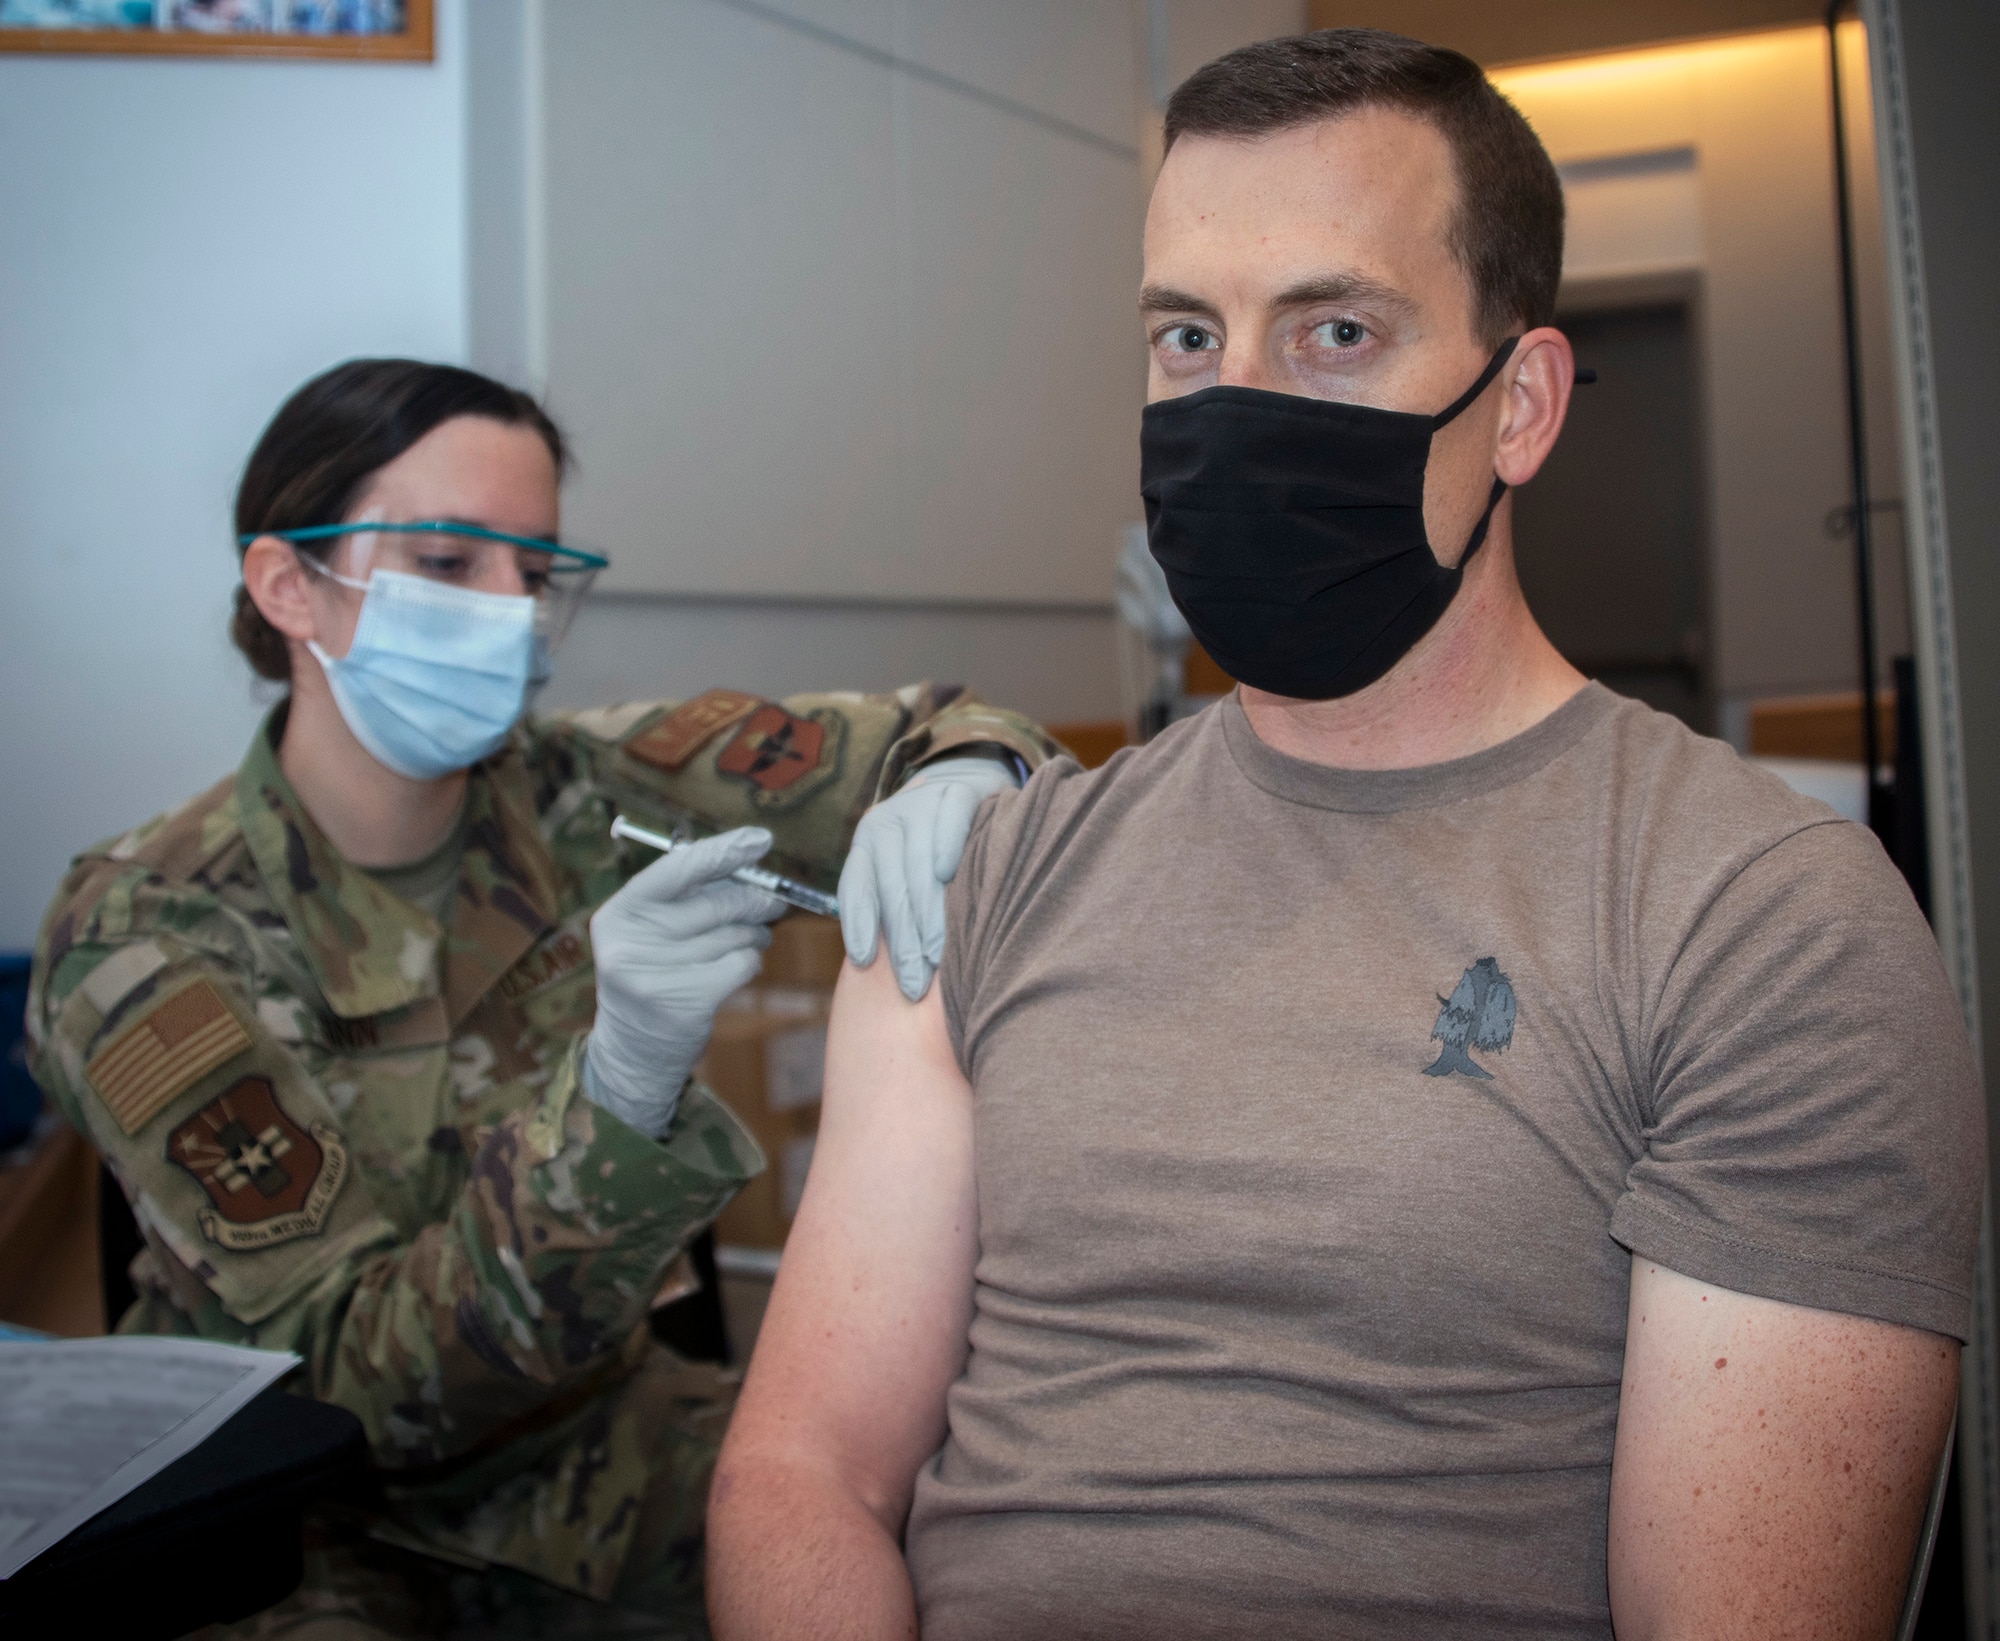 Air Force Senior Airman Kasey Ginn, medical technician, administers the COVID-19 vaccine to Navy Lt. Cmdr. Matthew Bush, physical therapy fellow, at Brooke Army Medical Center, Joint Base San Antonio-Fort Sam Houston Jan. 26.